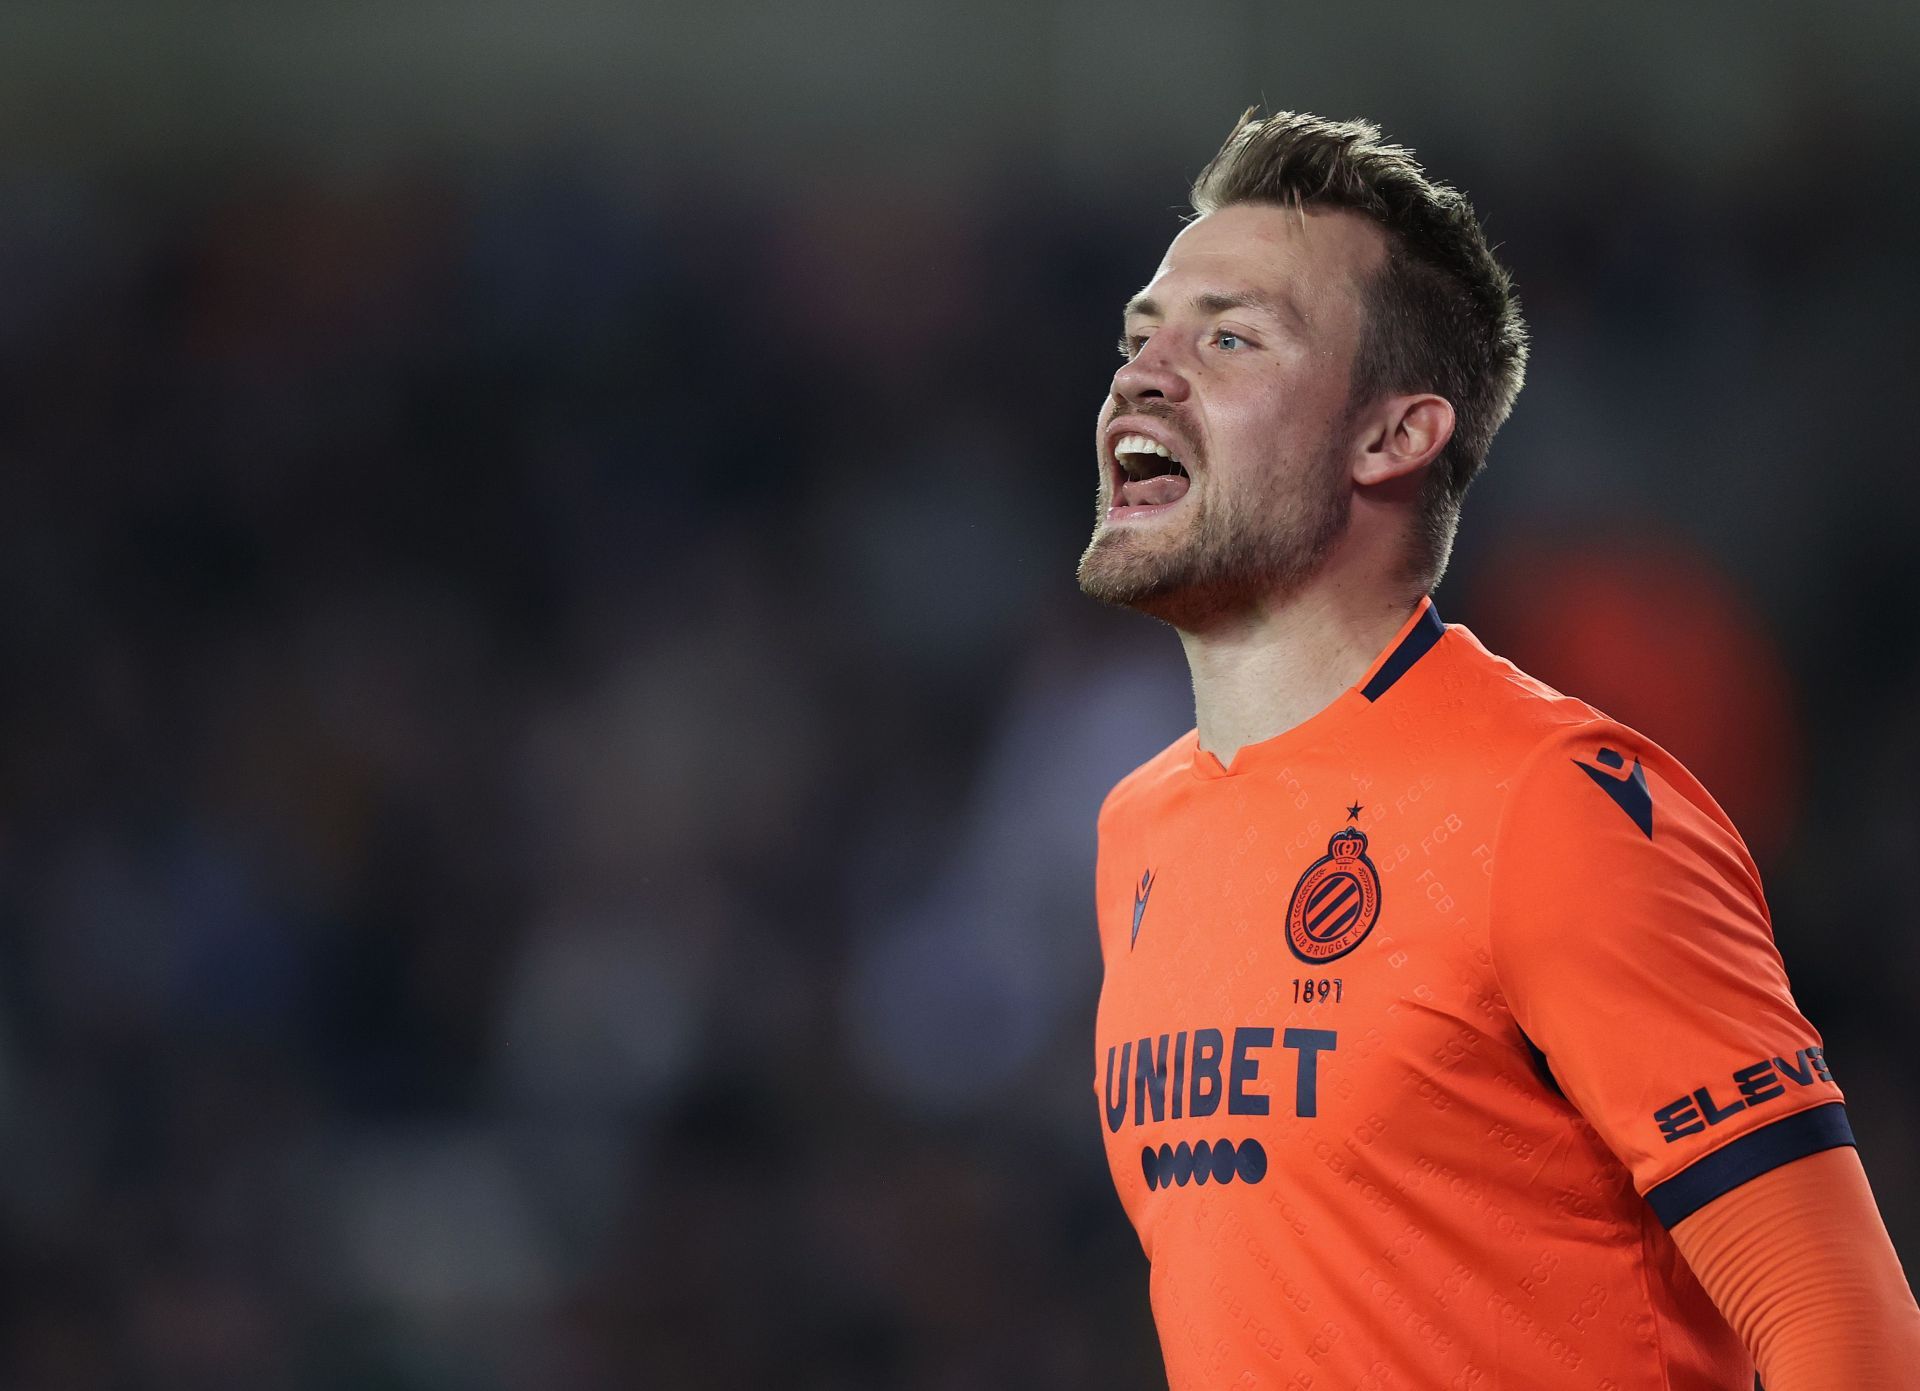 Simon Mignolet could be in for a busy night when Club Brugge play PSG.